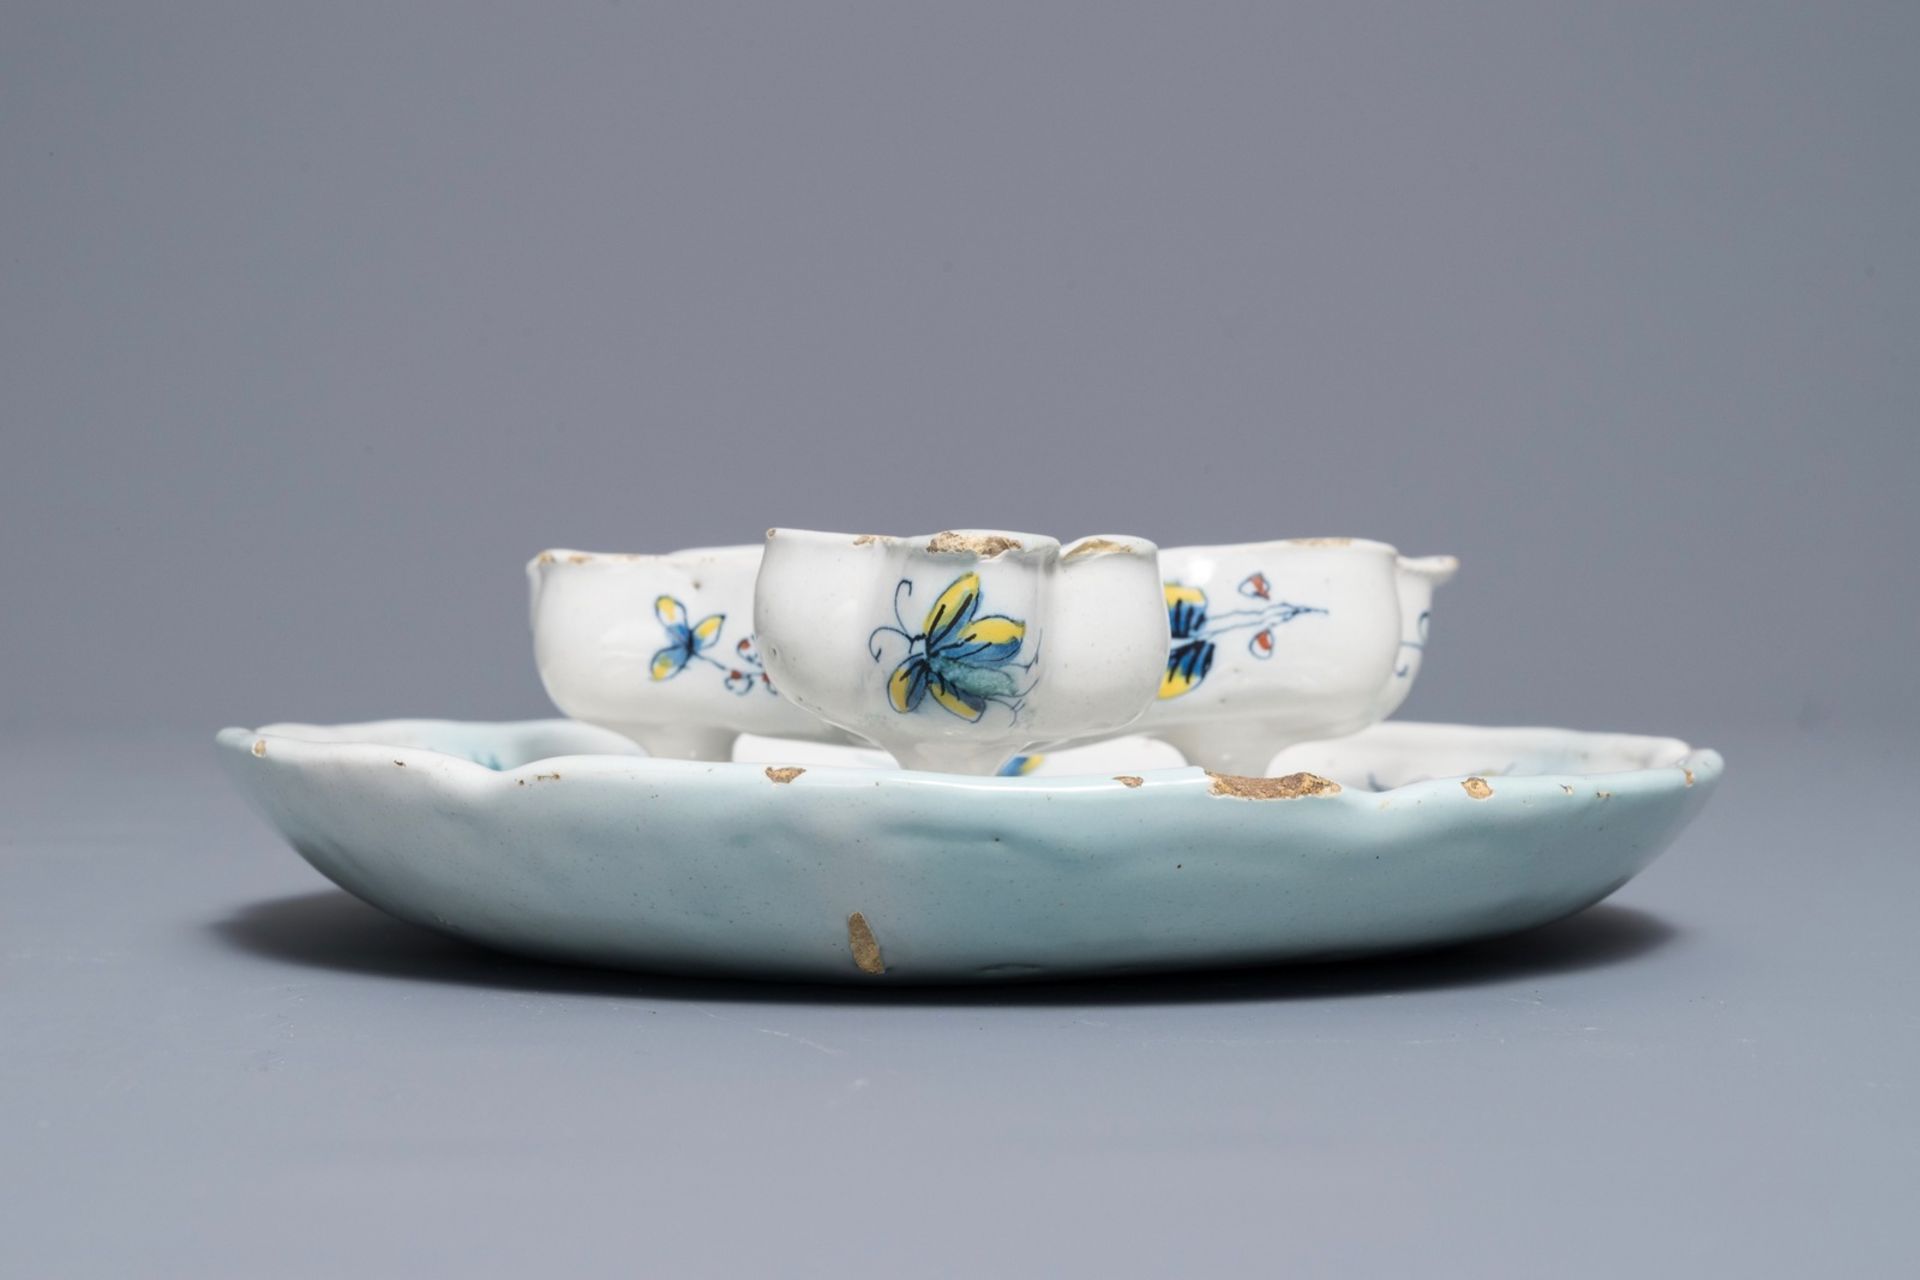 A Brussels faience spice dish with butterflies and flowers, 18th C. - Image 4 of 6